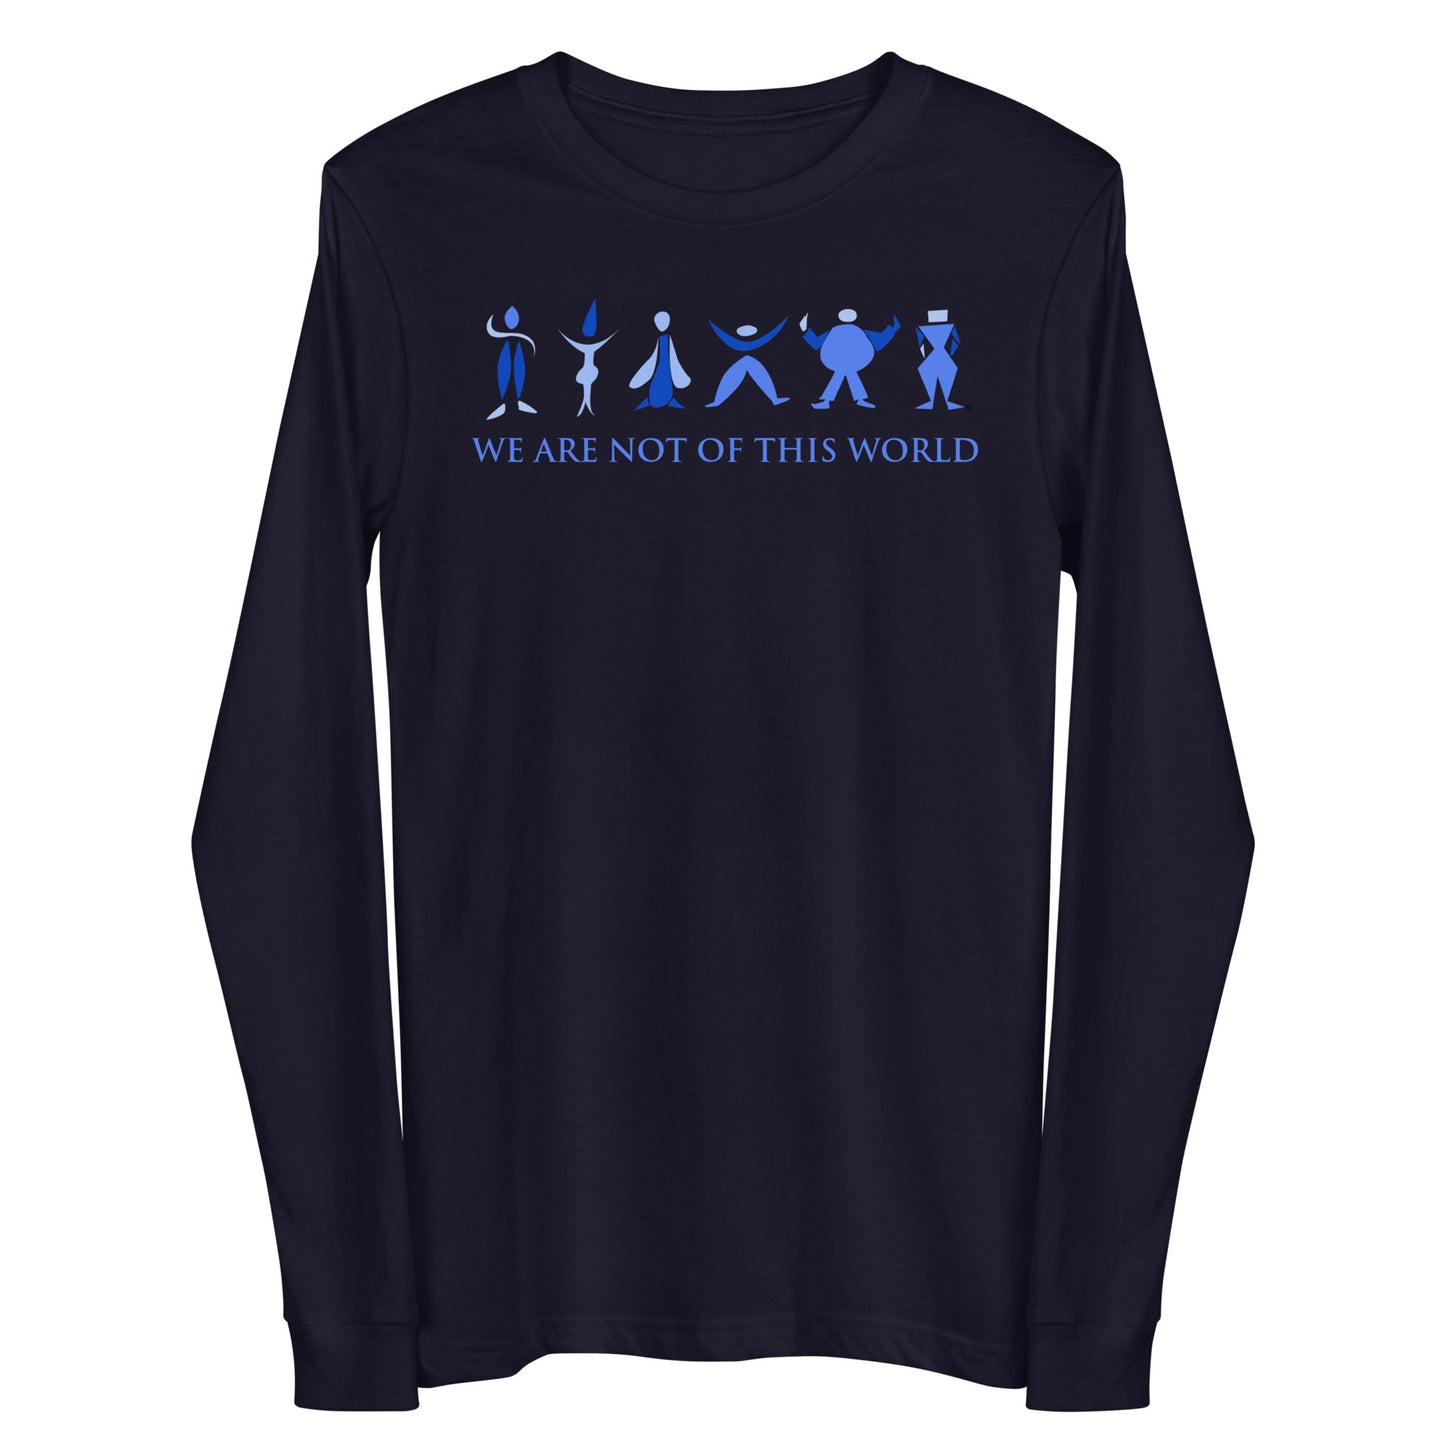 We Are Not of This World Women's Long Sleeve Tee